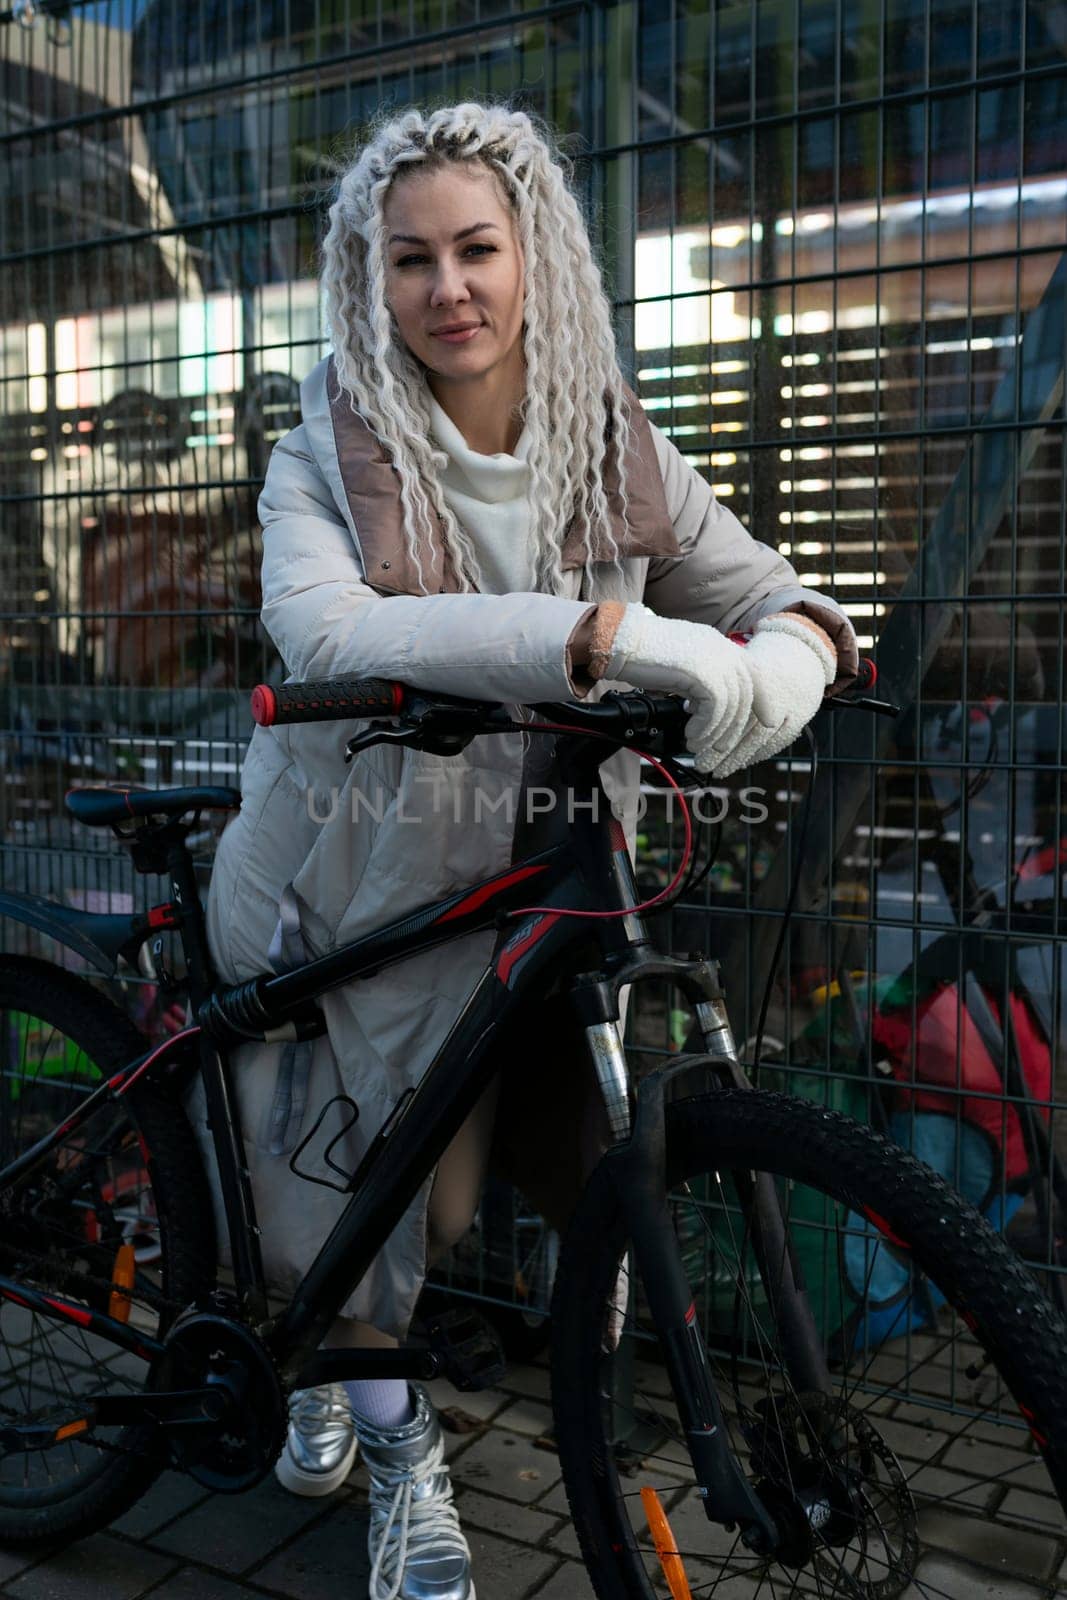 A woman is casually sitting on top of a bike parked next to a fence. She appears relaxed and is looking around. The fence is made of wood and separates a grass field from the sidewalk.